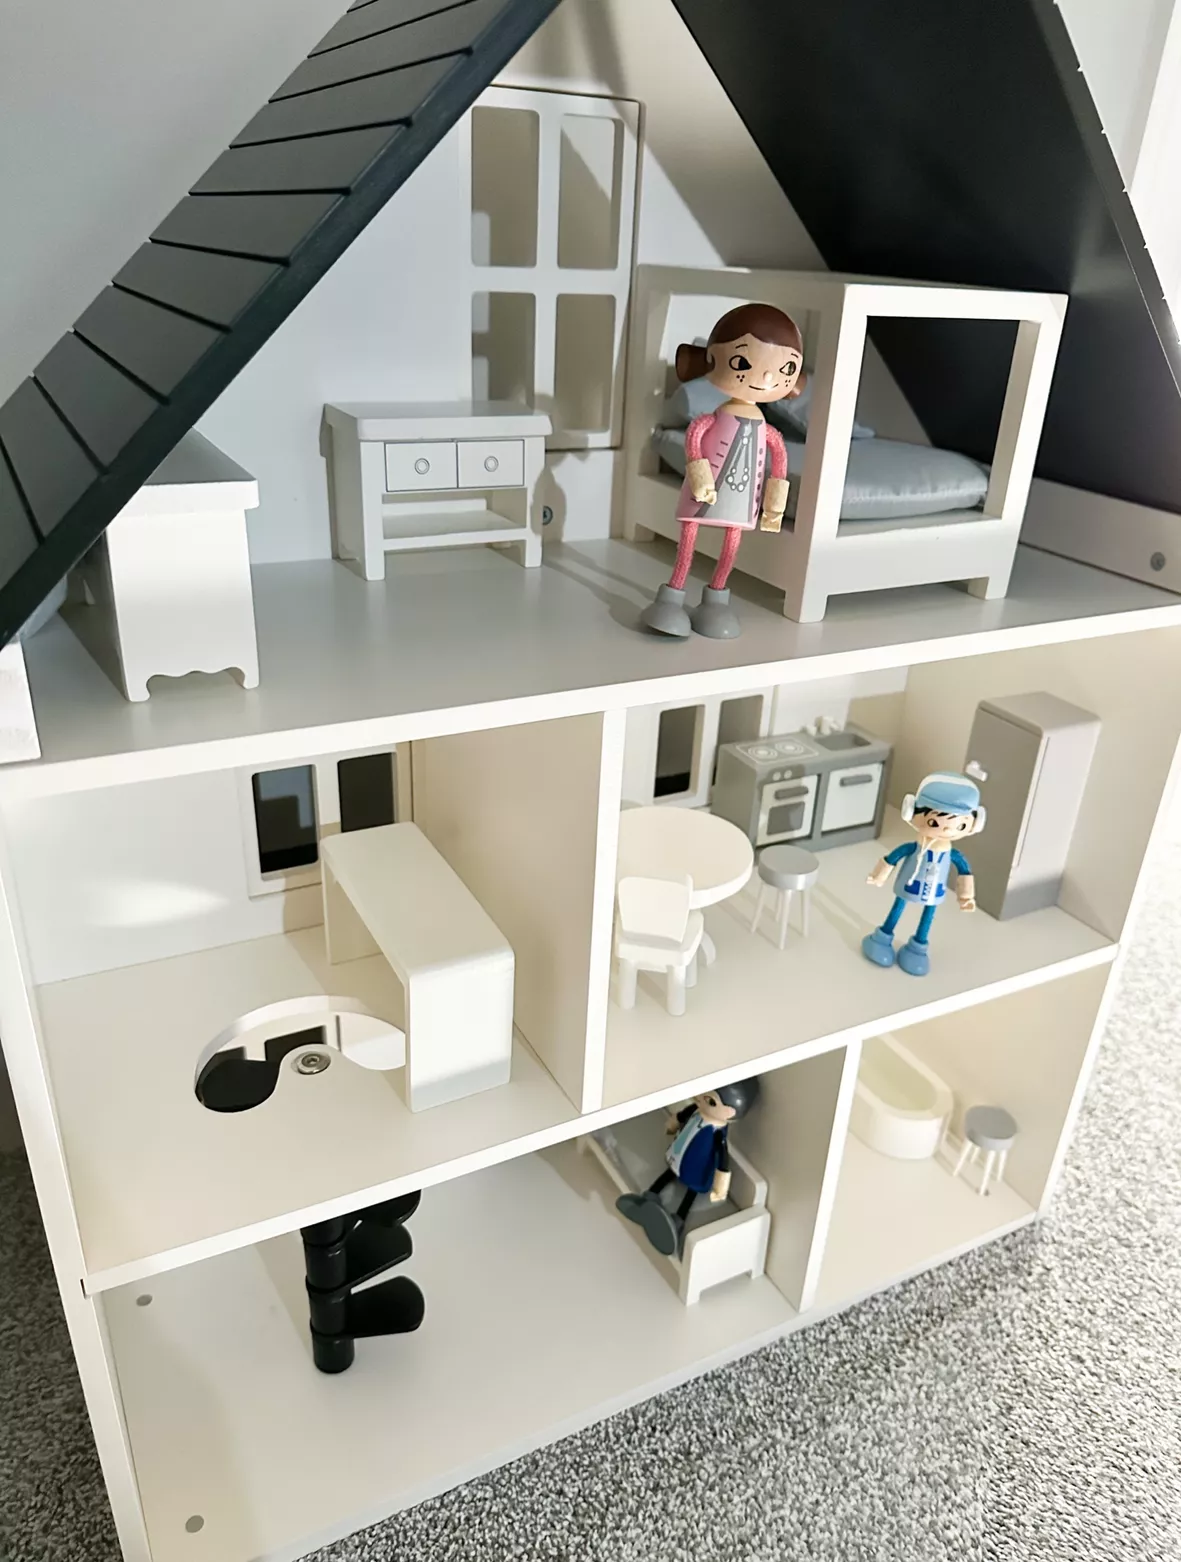 Dollhouse Accessory Pack